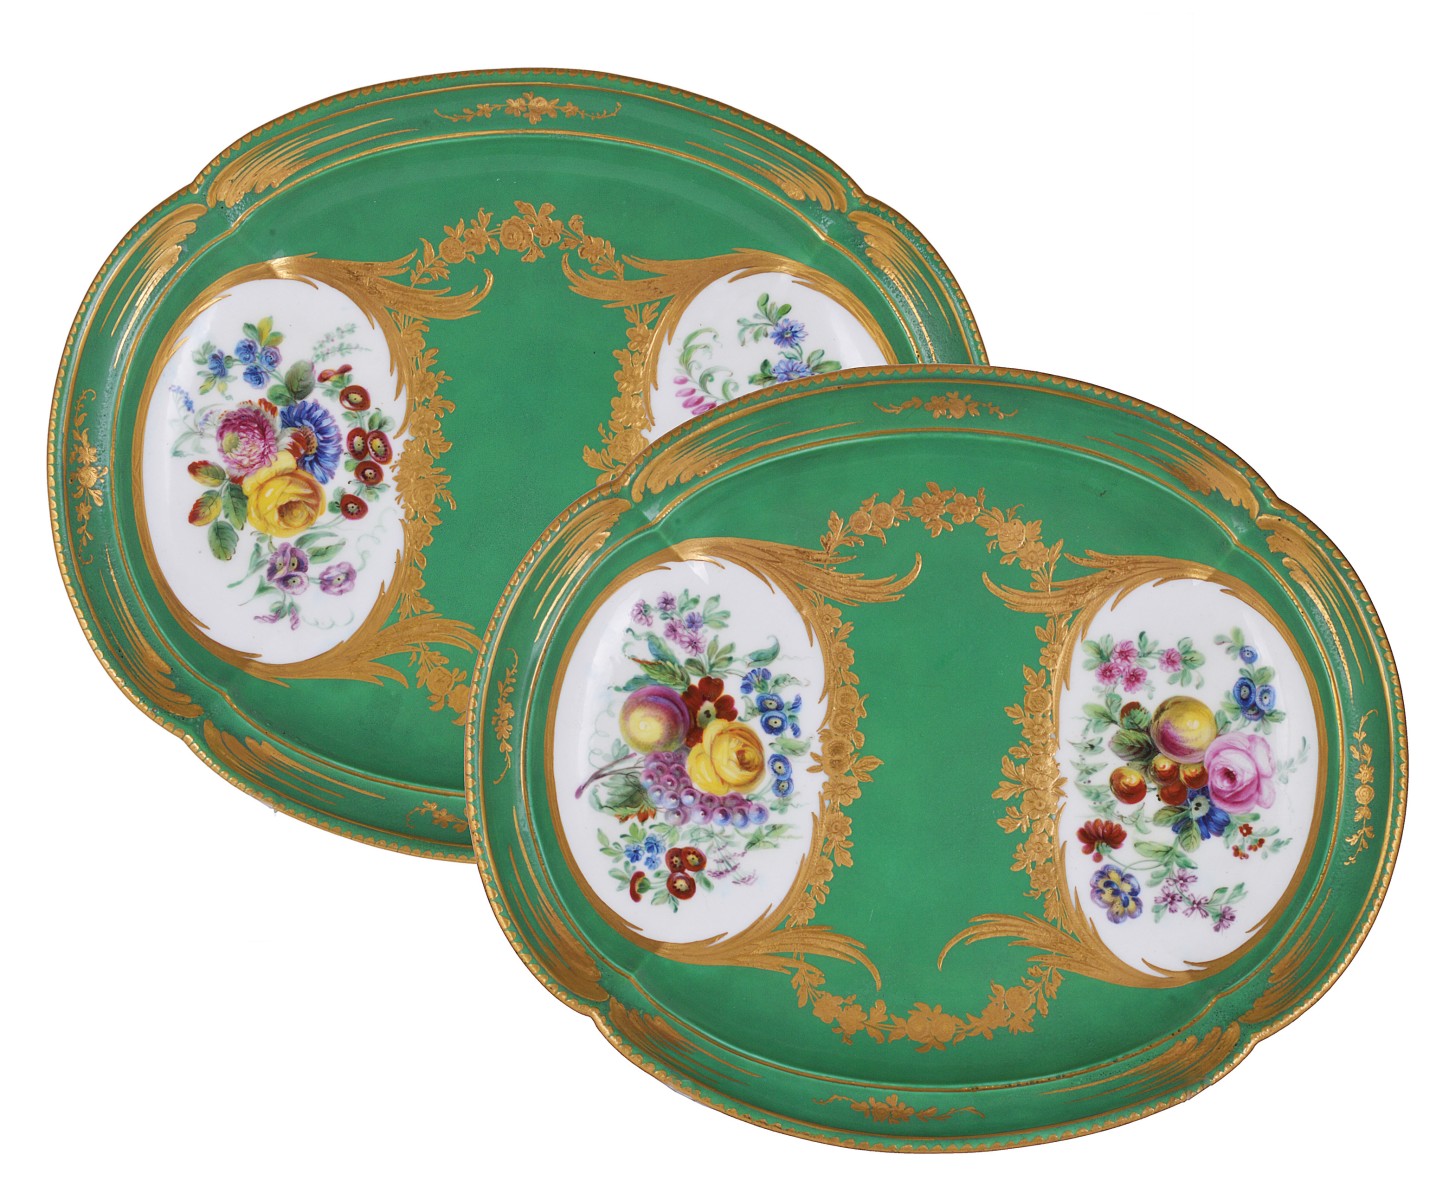 **A PAIR OF SEVRES TUREEN STANDS, THE PORCELAIN 18TH CENTURY AND LATER DECORATED each with two